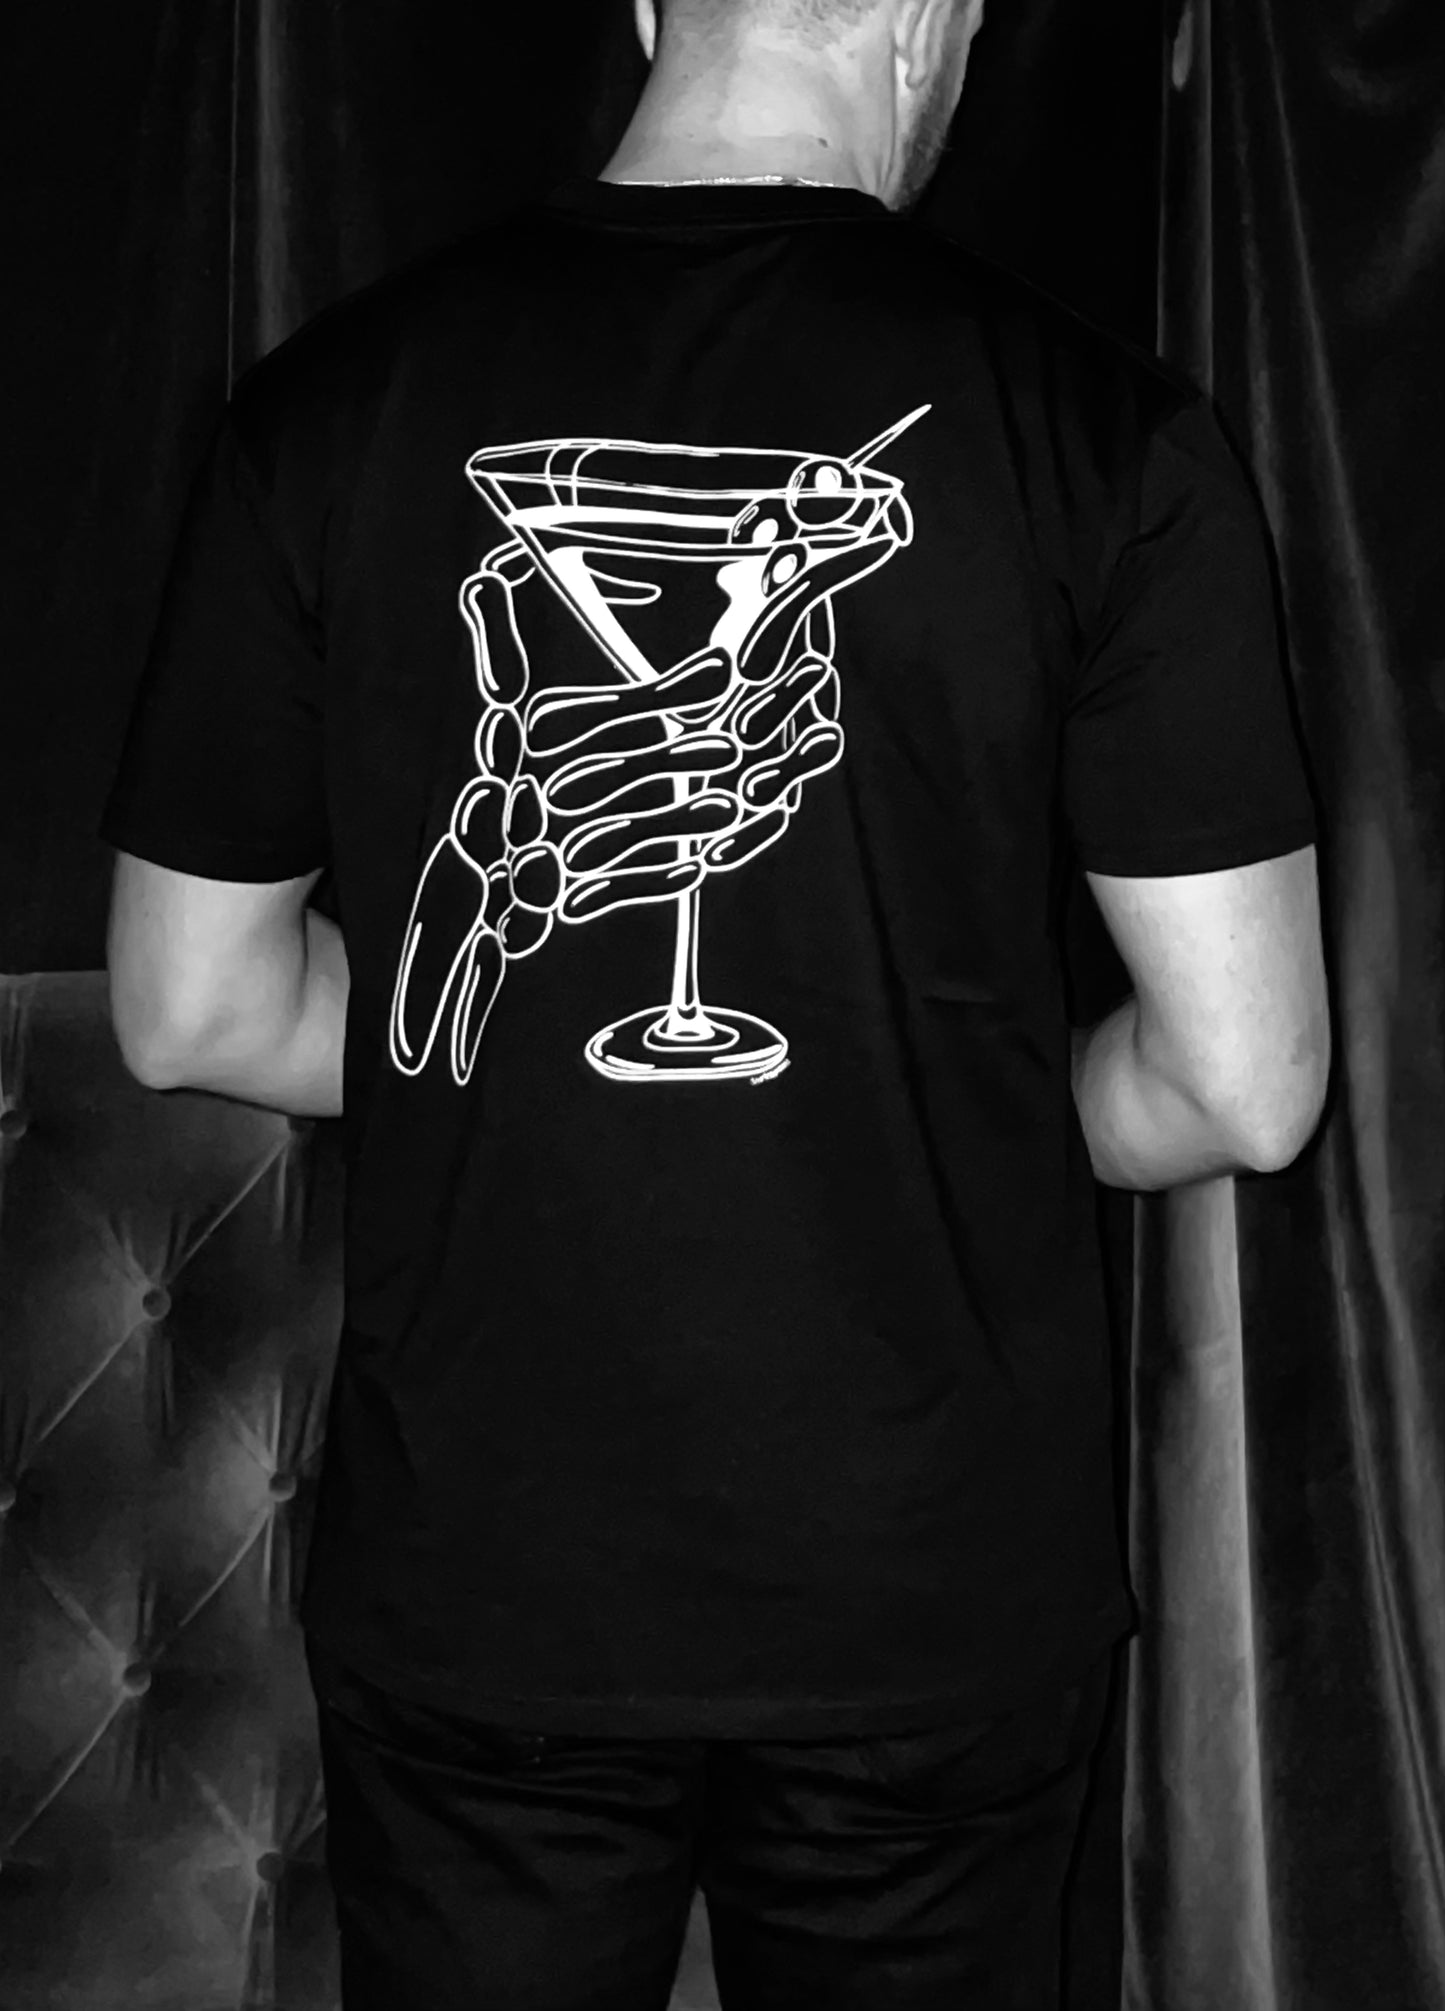 “Deadly Martini” T-shirt